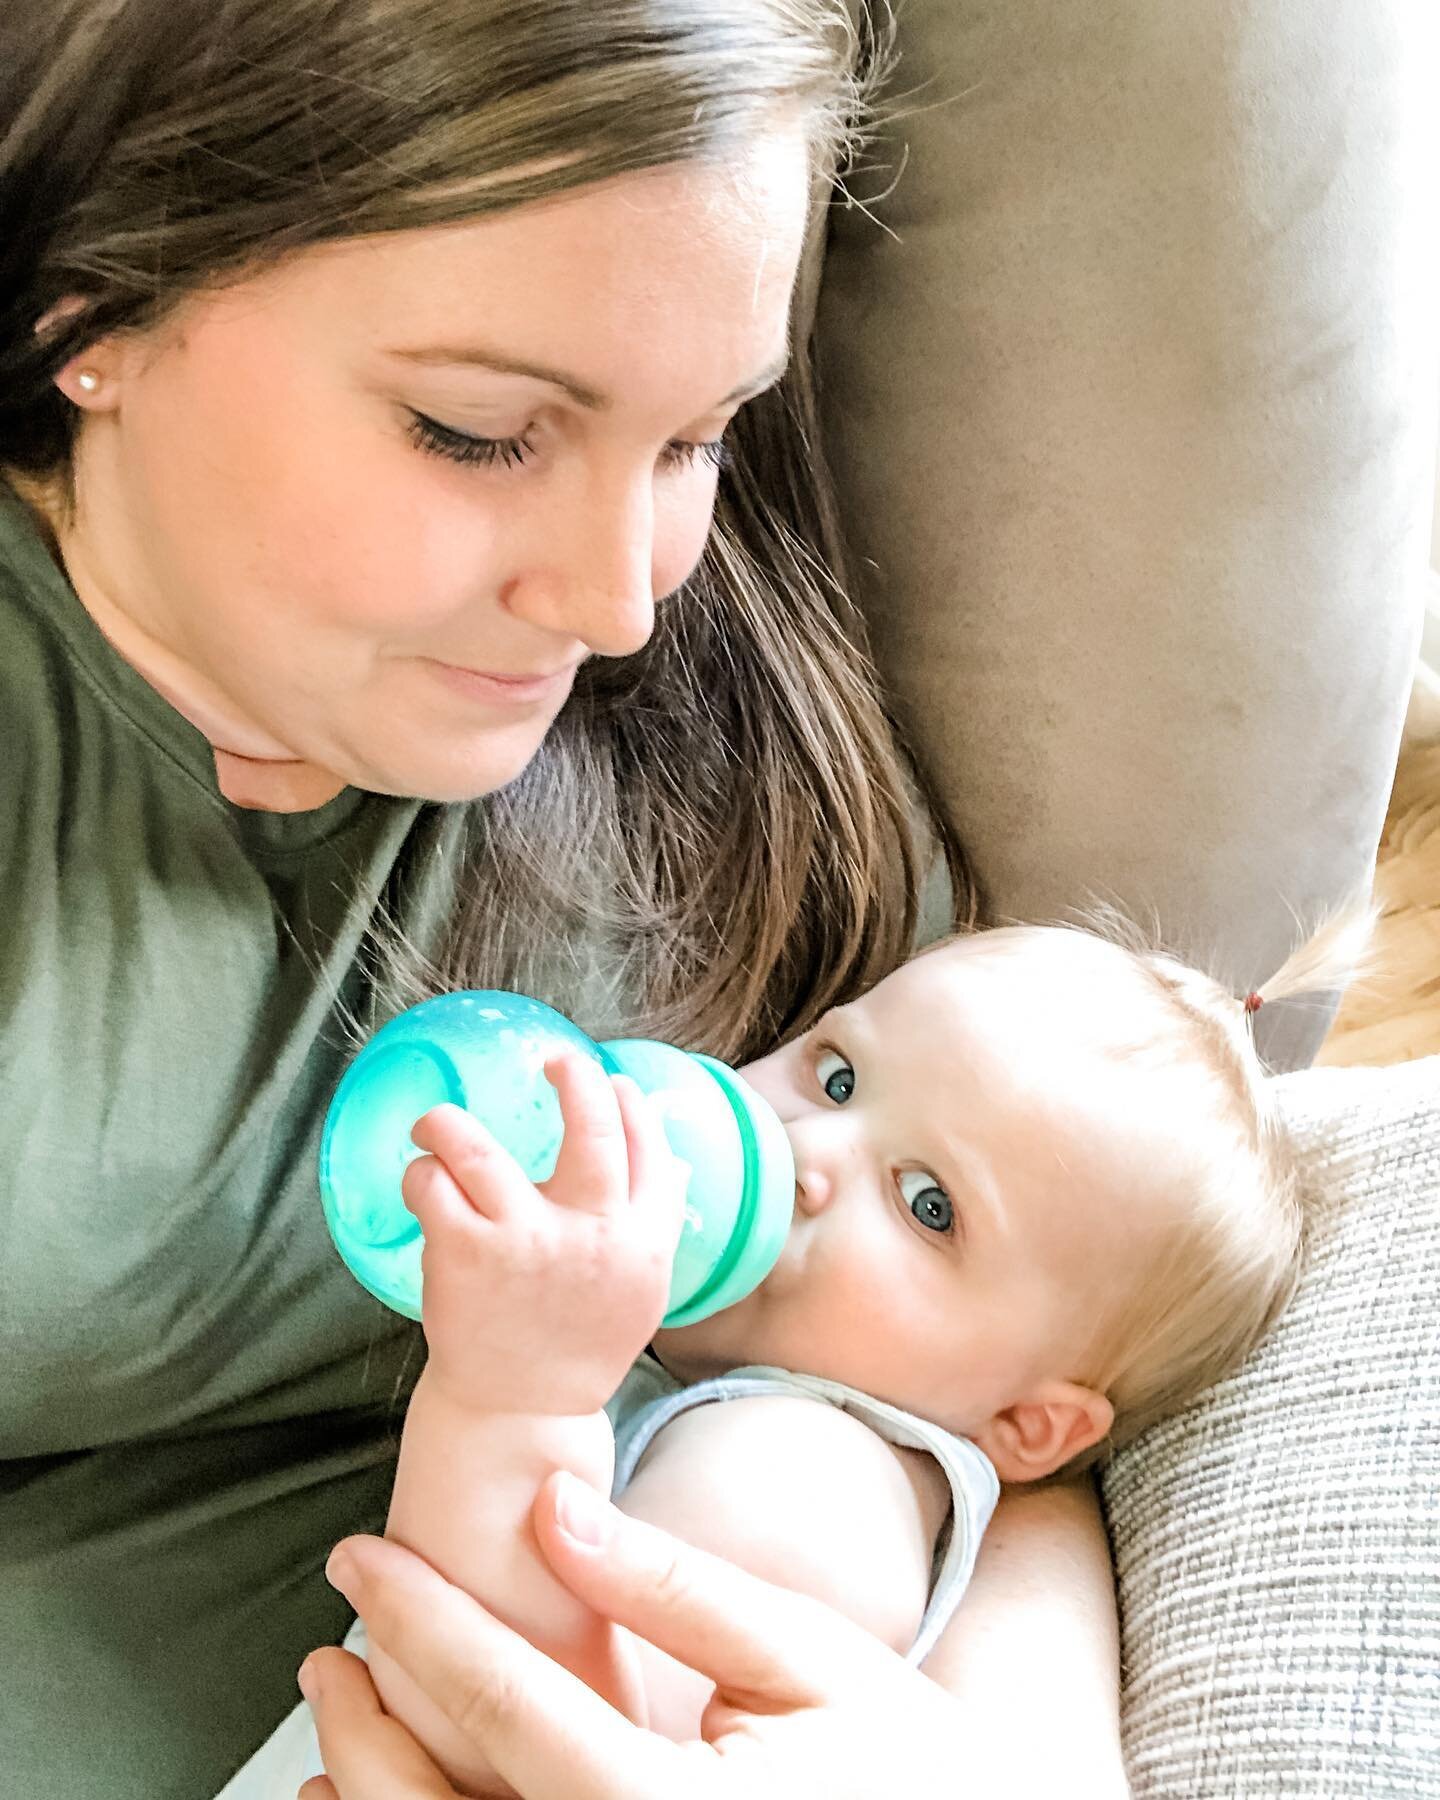 &lsquo;I need to leave. I have to get out of here.&rsquo; I felt clammy, trapped. Anxiety was taking precious memories away from me.&rsquo; 

I&rsquo;ve never shared this before, but my FULL story on dealing with postpartum anxiety has been featured 